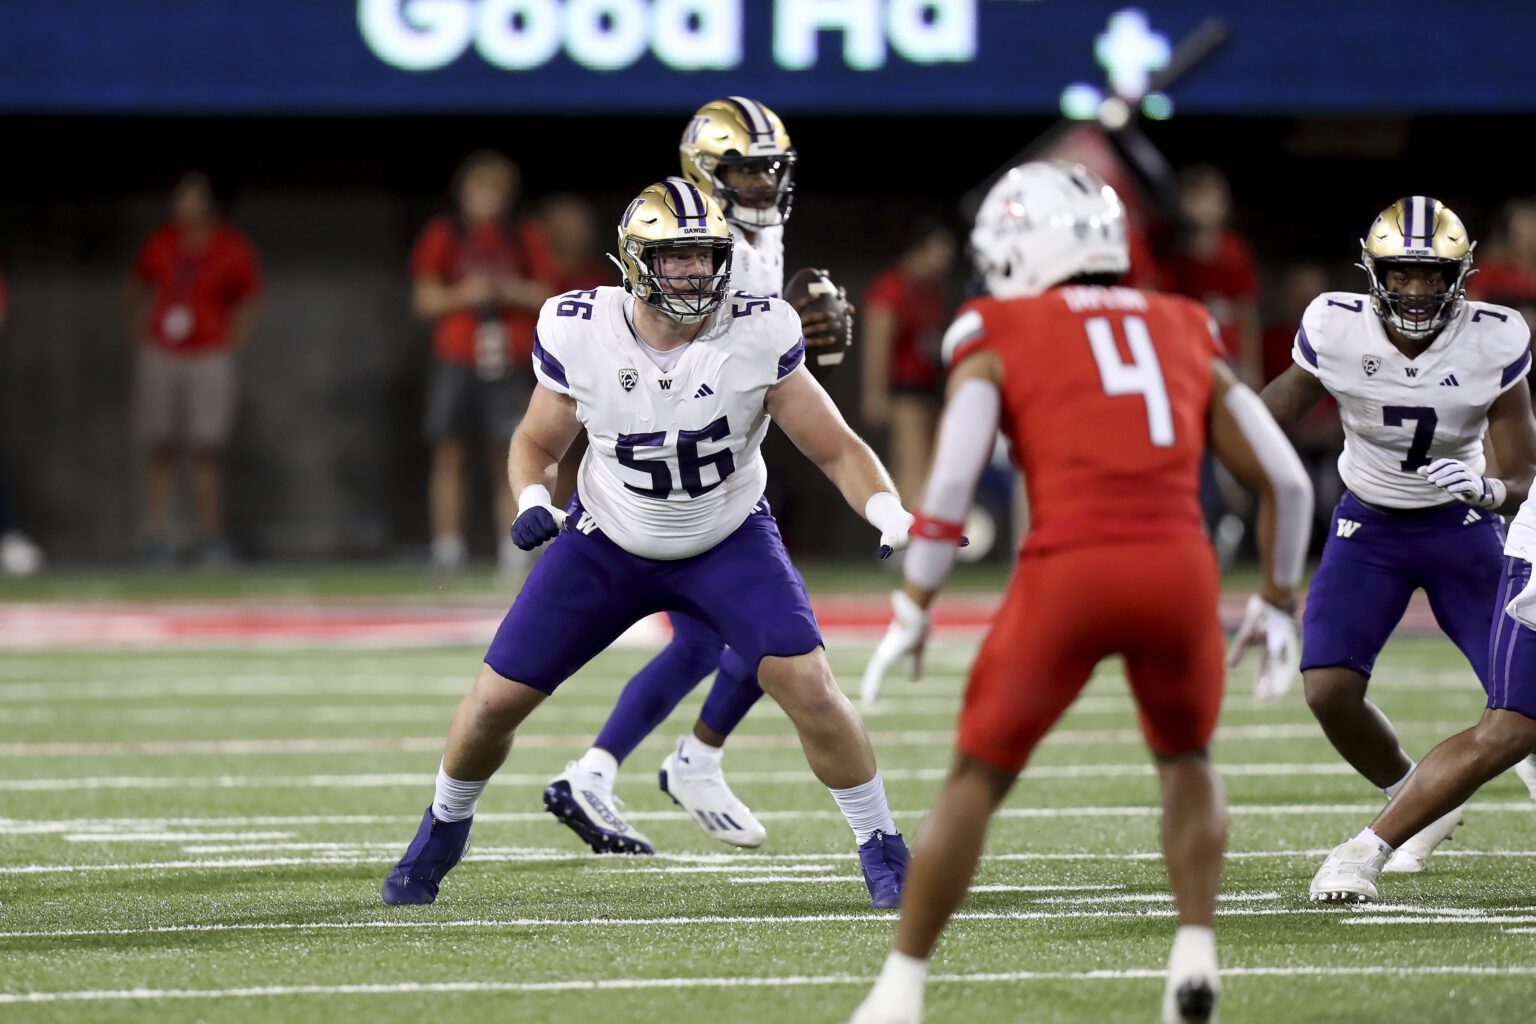 Washington Huskies offensive lineman Geirean Hatchett (56) drops into pass protection as the opposing team member gets ready.